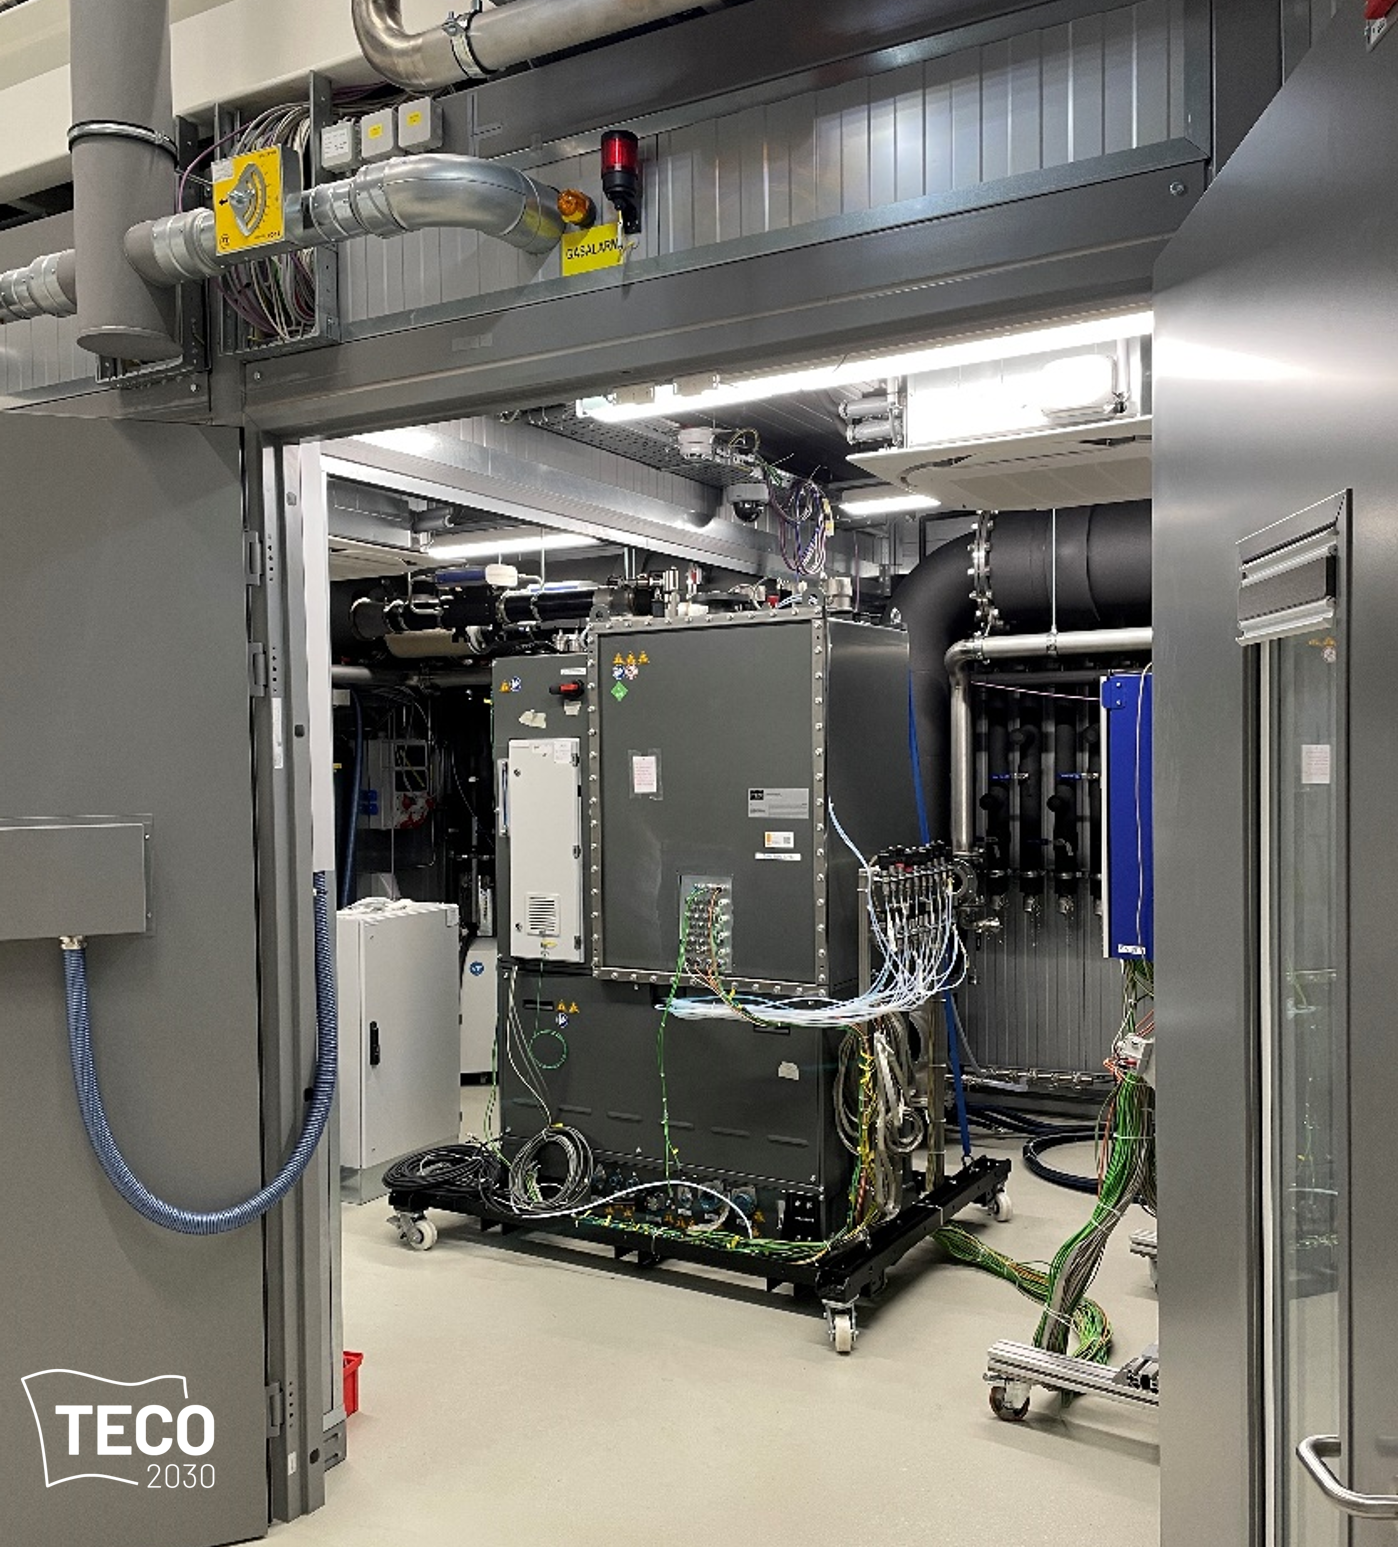 TECO 2030 Fuel Cell Module 400kW, FCM400: The unit is on the test bed at AVL’s facility in Graz, Austria.